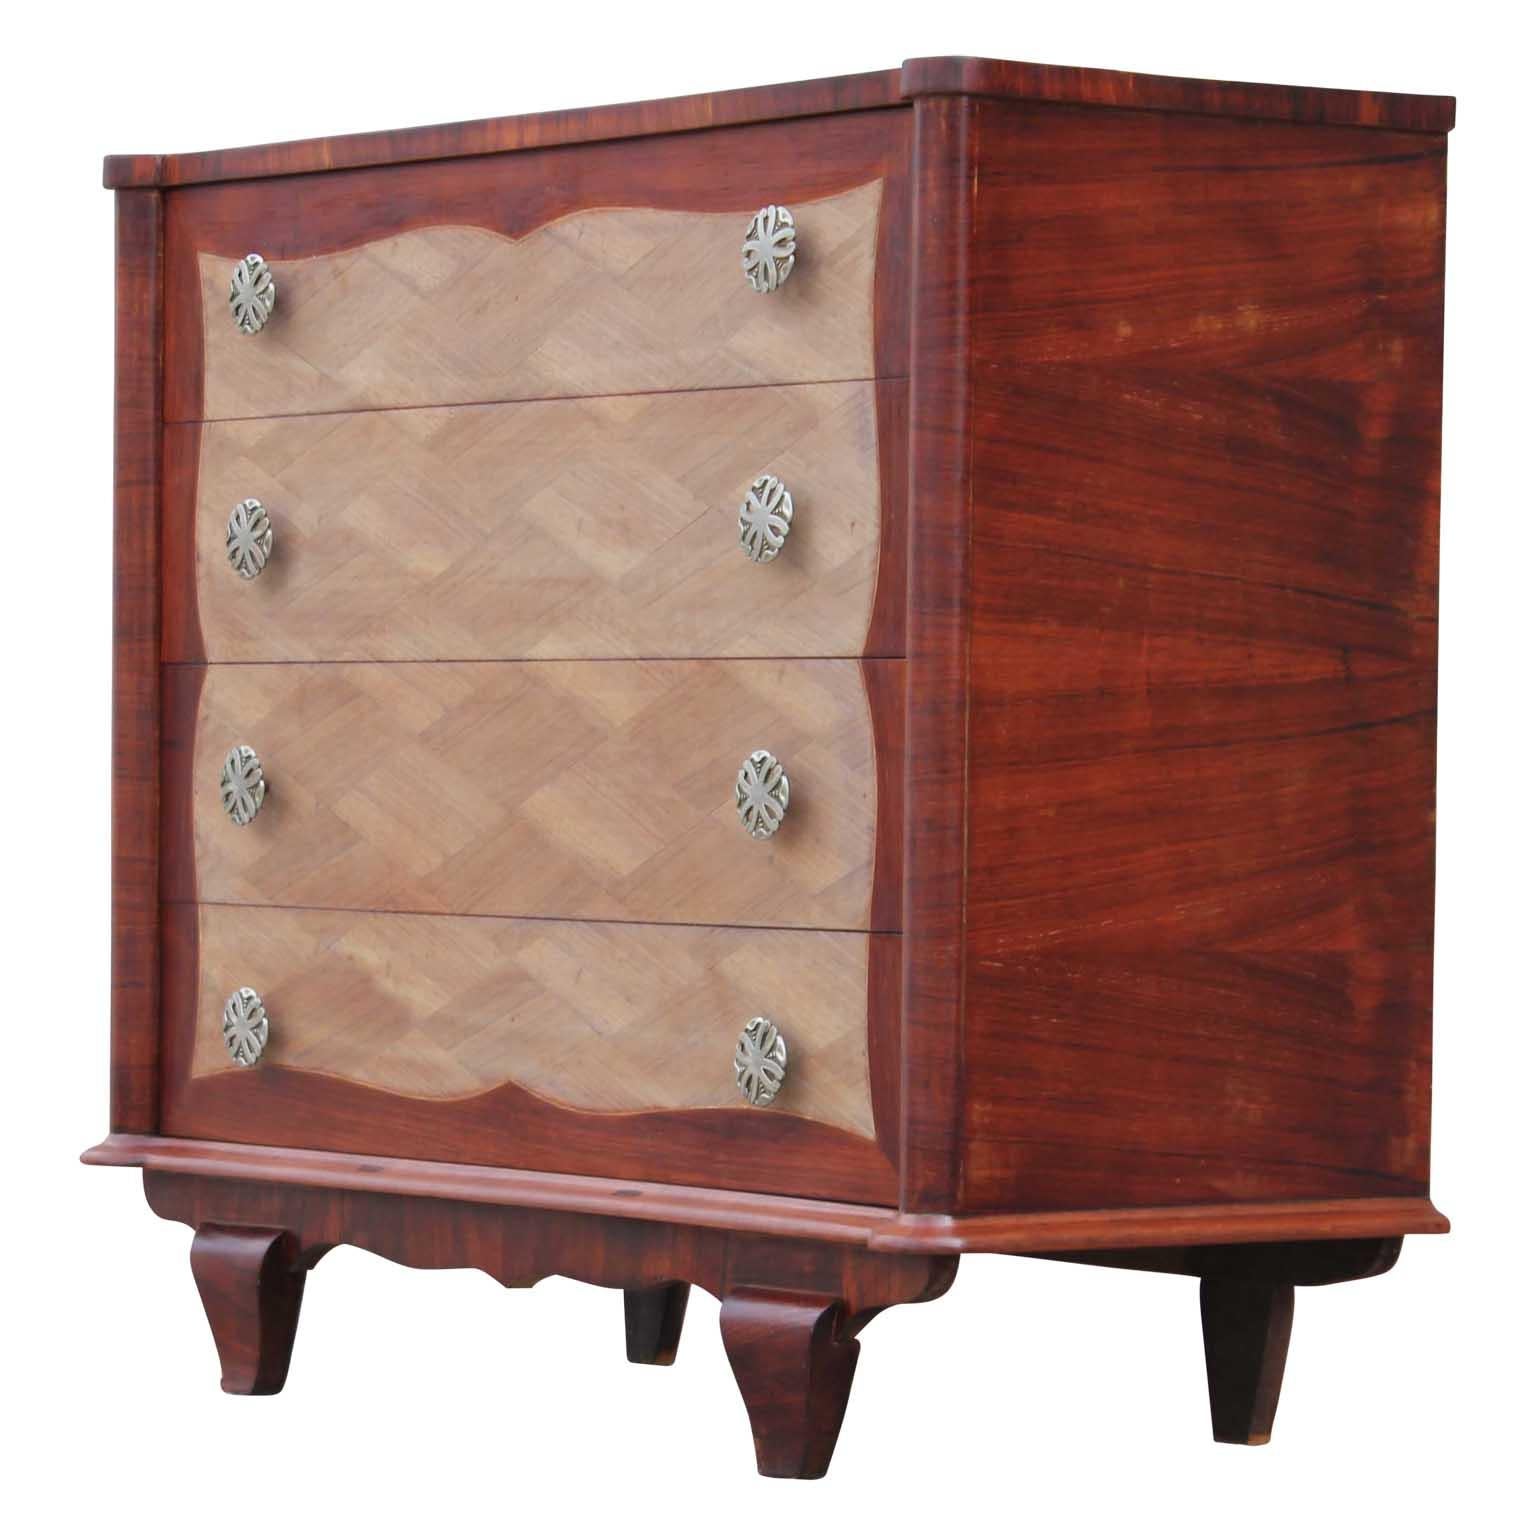 Beautiful modern four-drawer Italian parquetry restored rosewood chest, circa 1950s.